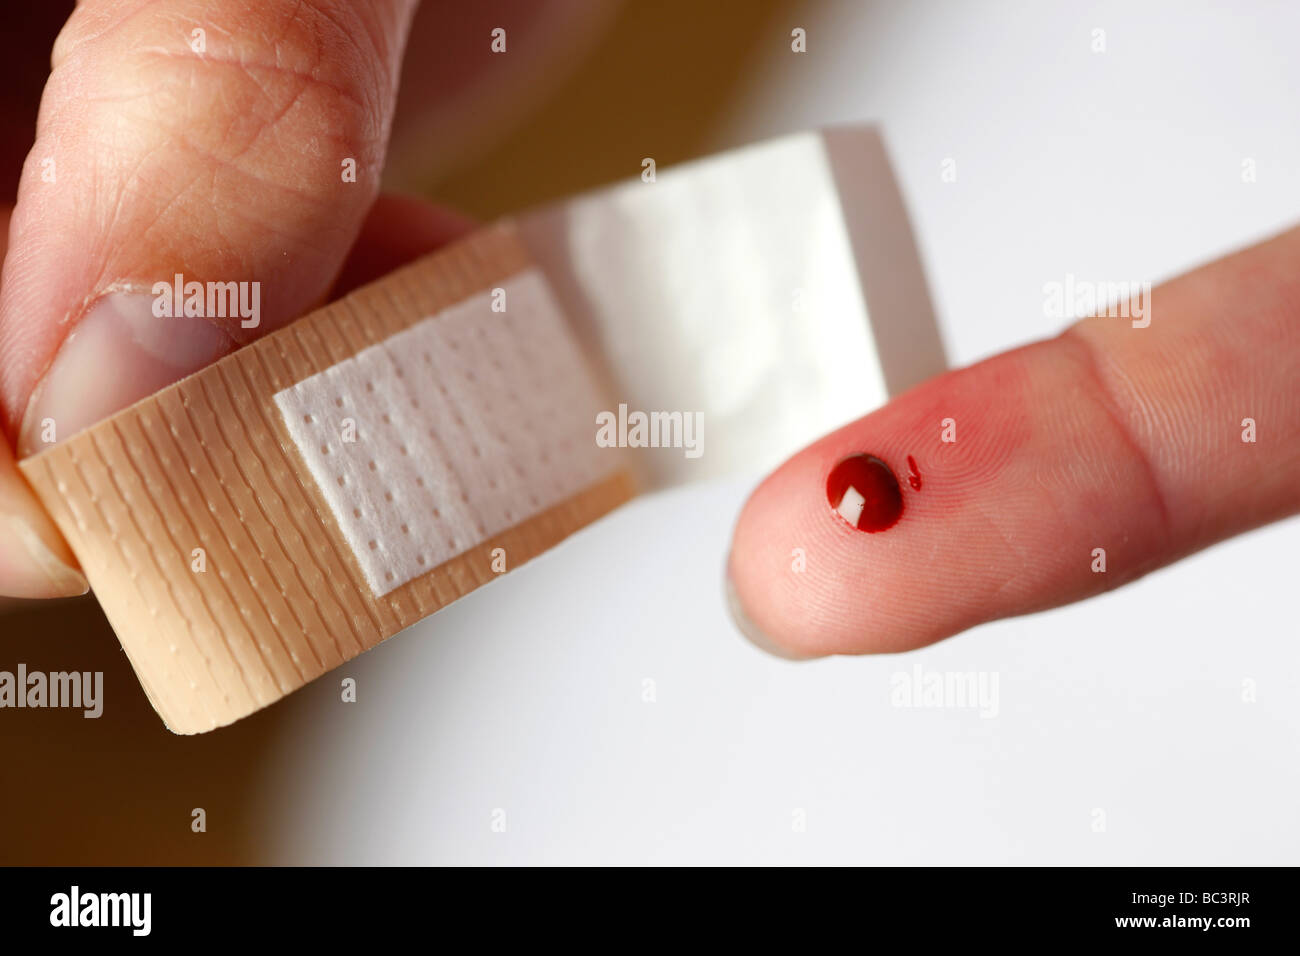 Plaster applyed to a little wound on a finger Stock Photo